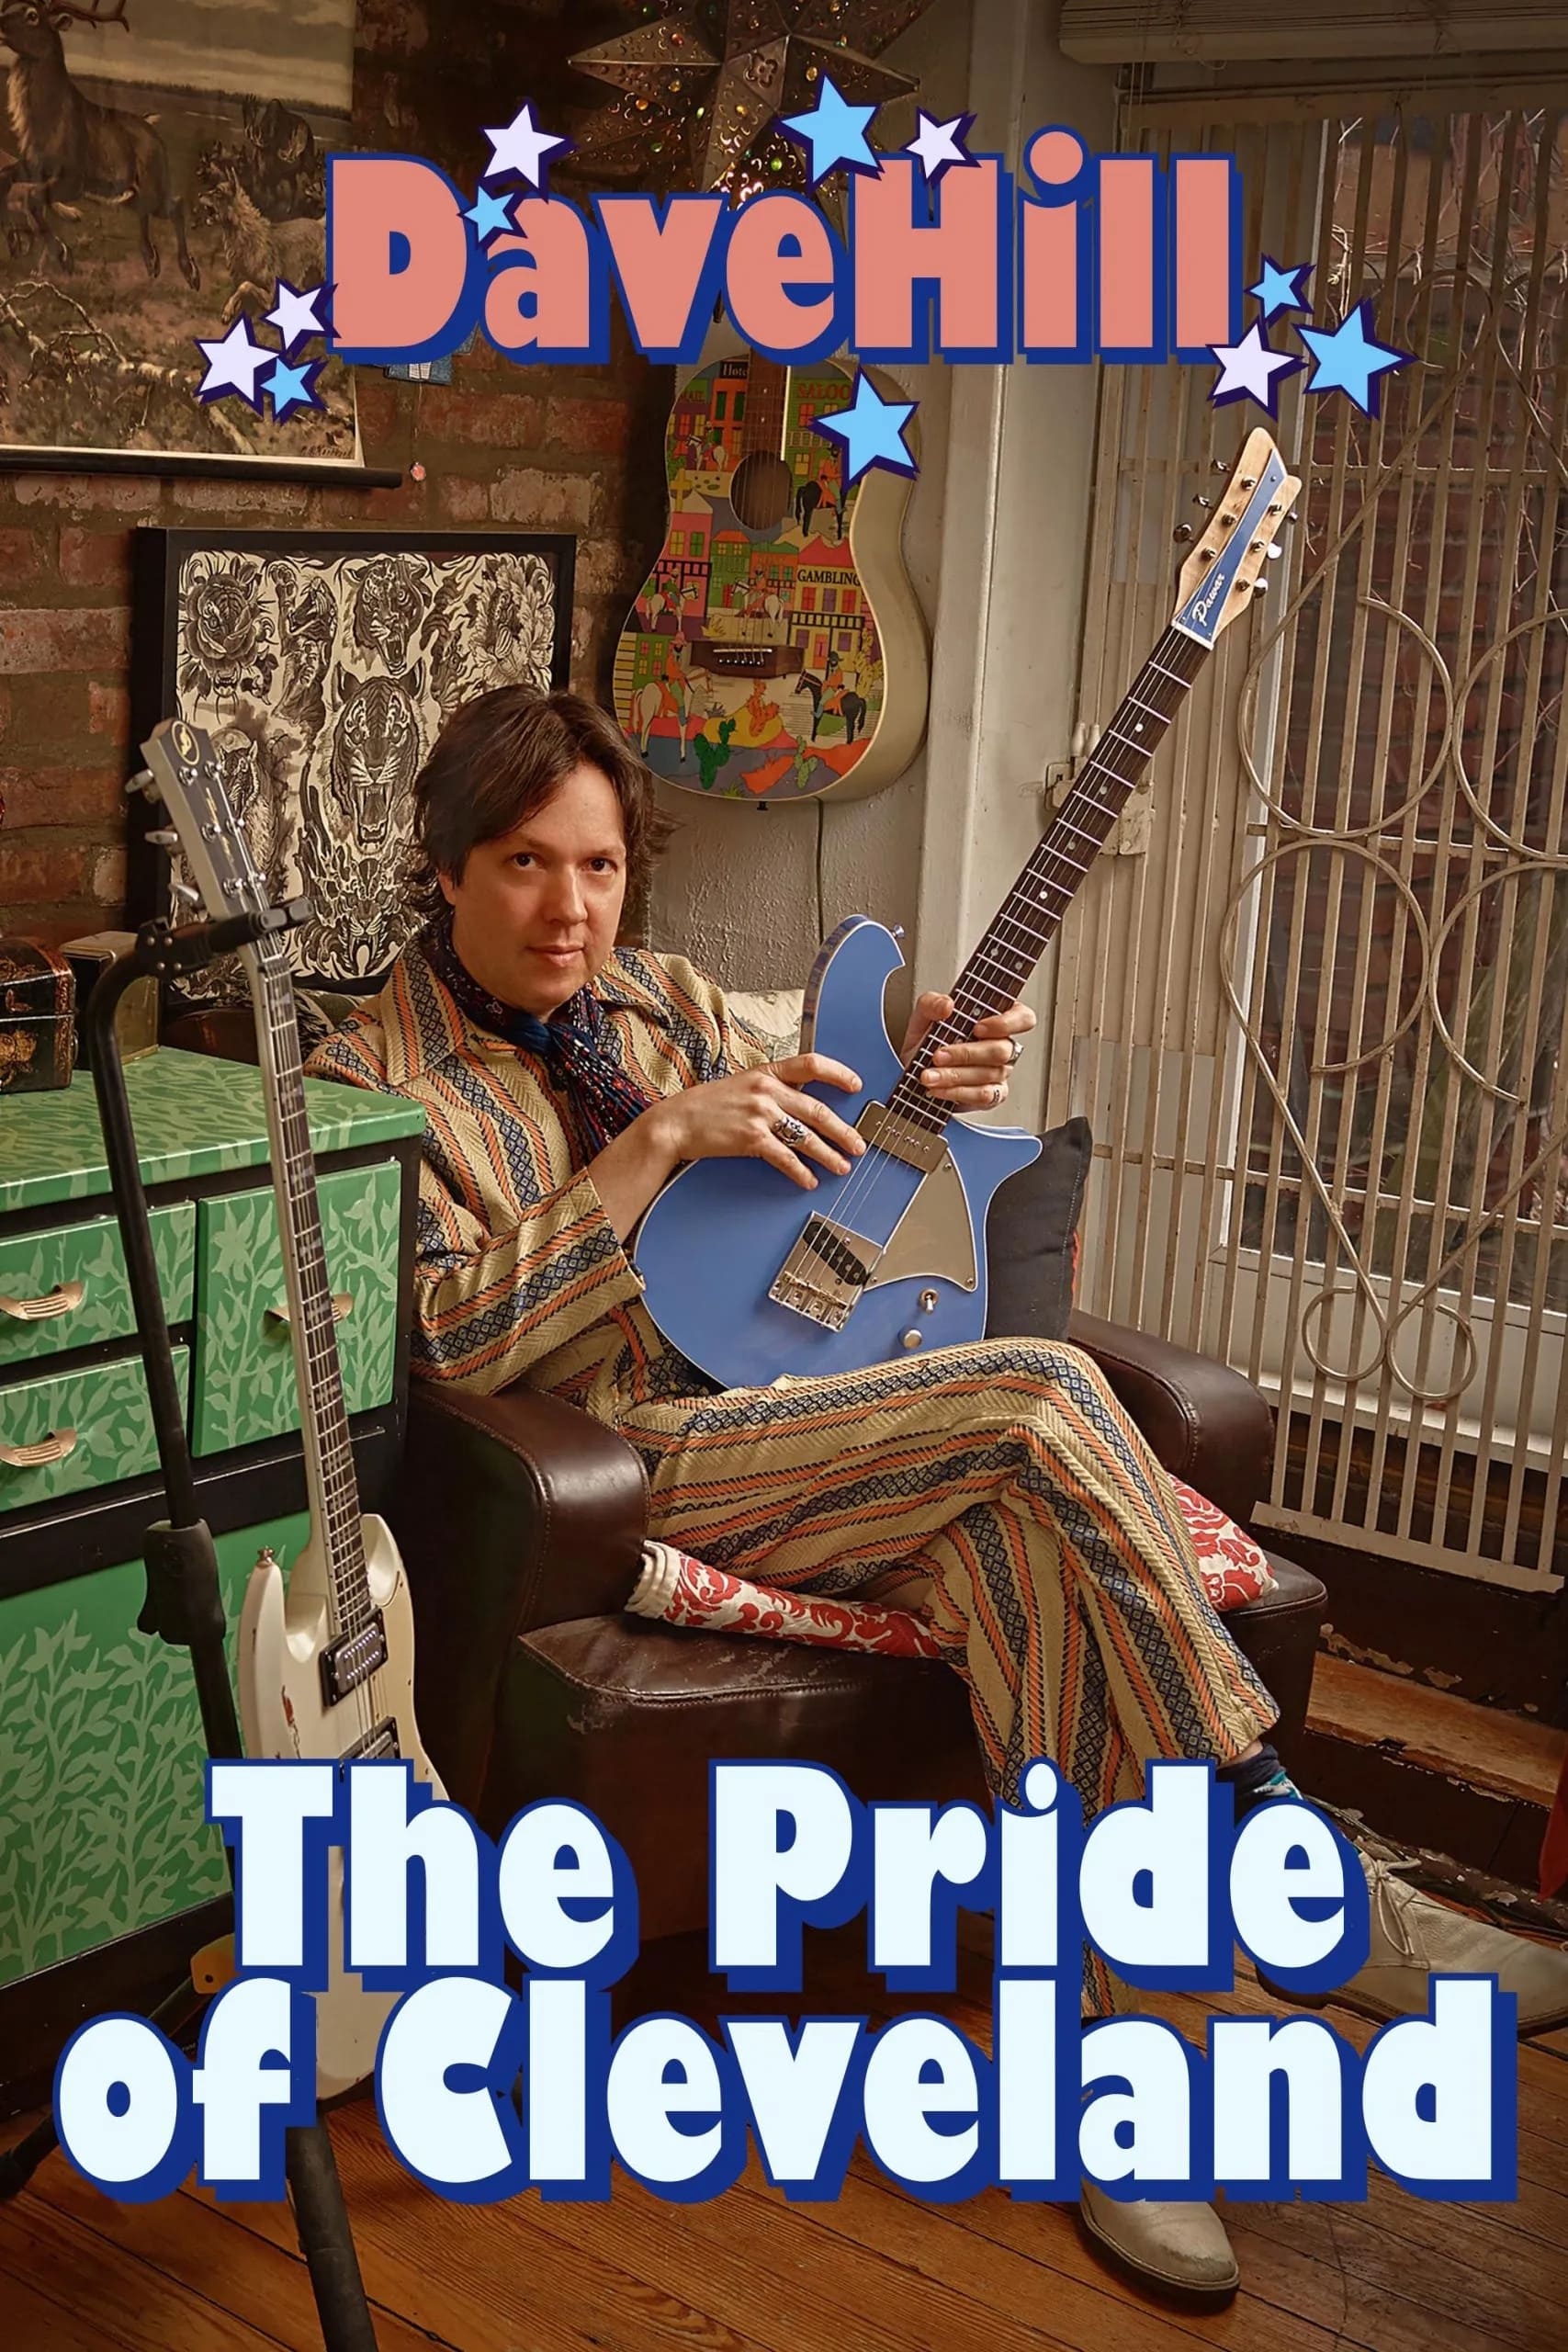 Dave Hill: The Pride Of Cleveland